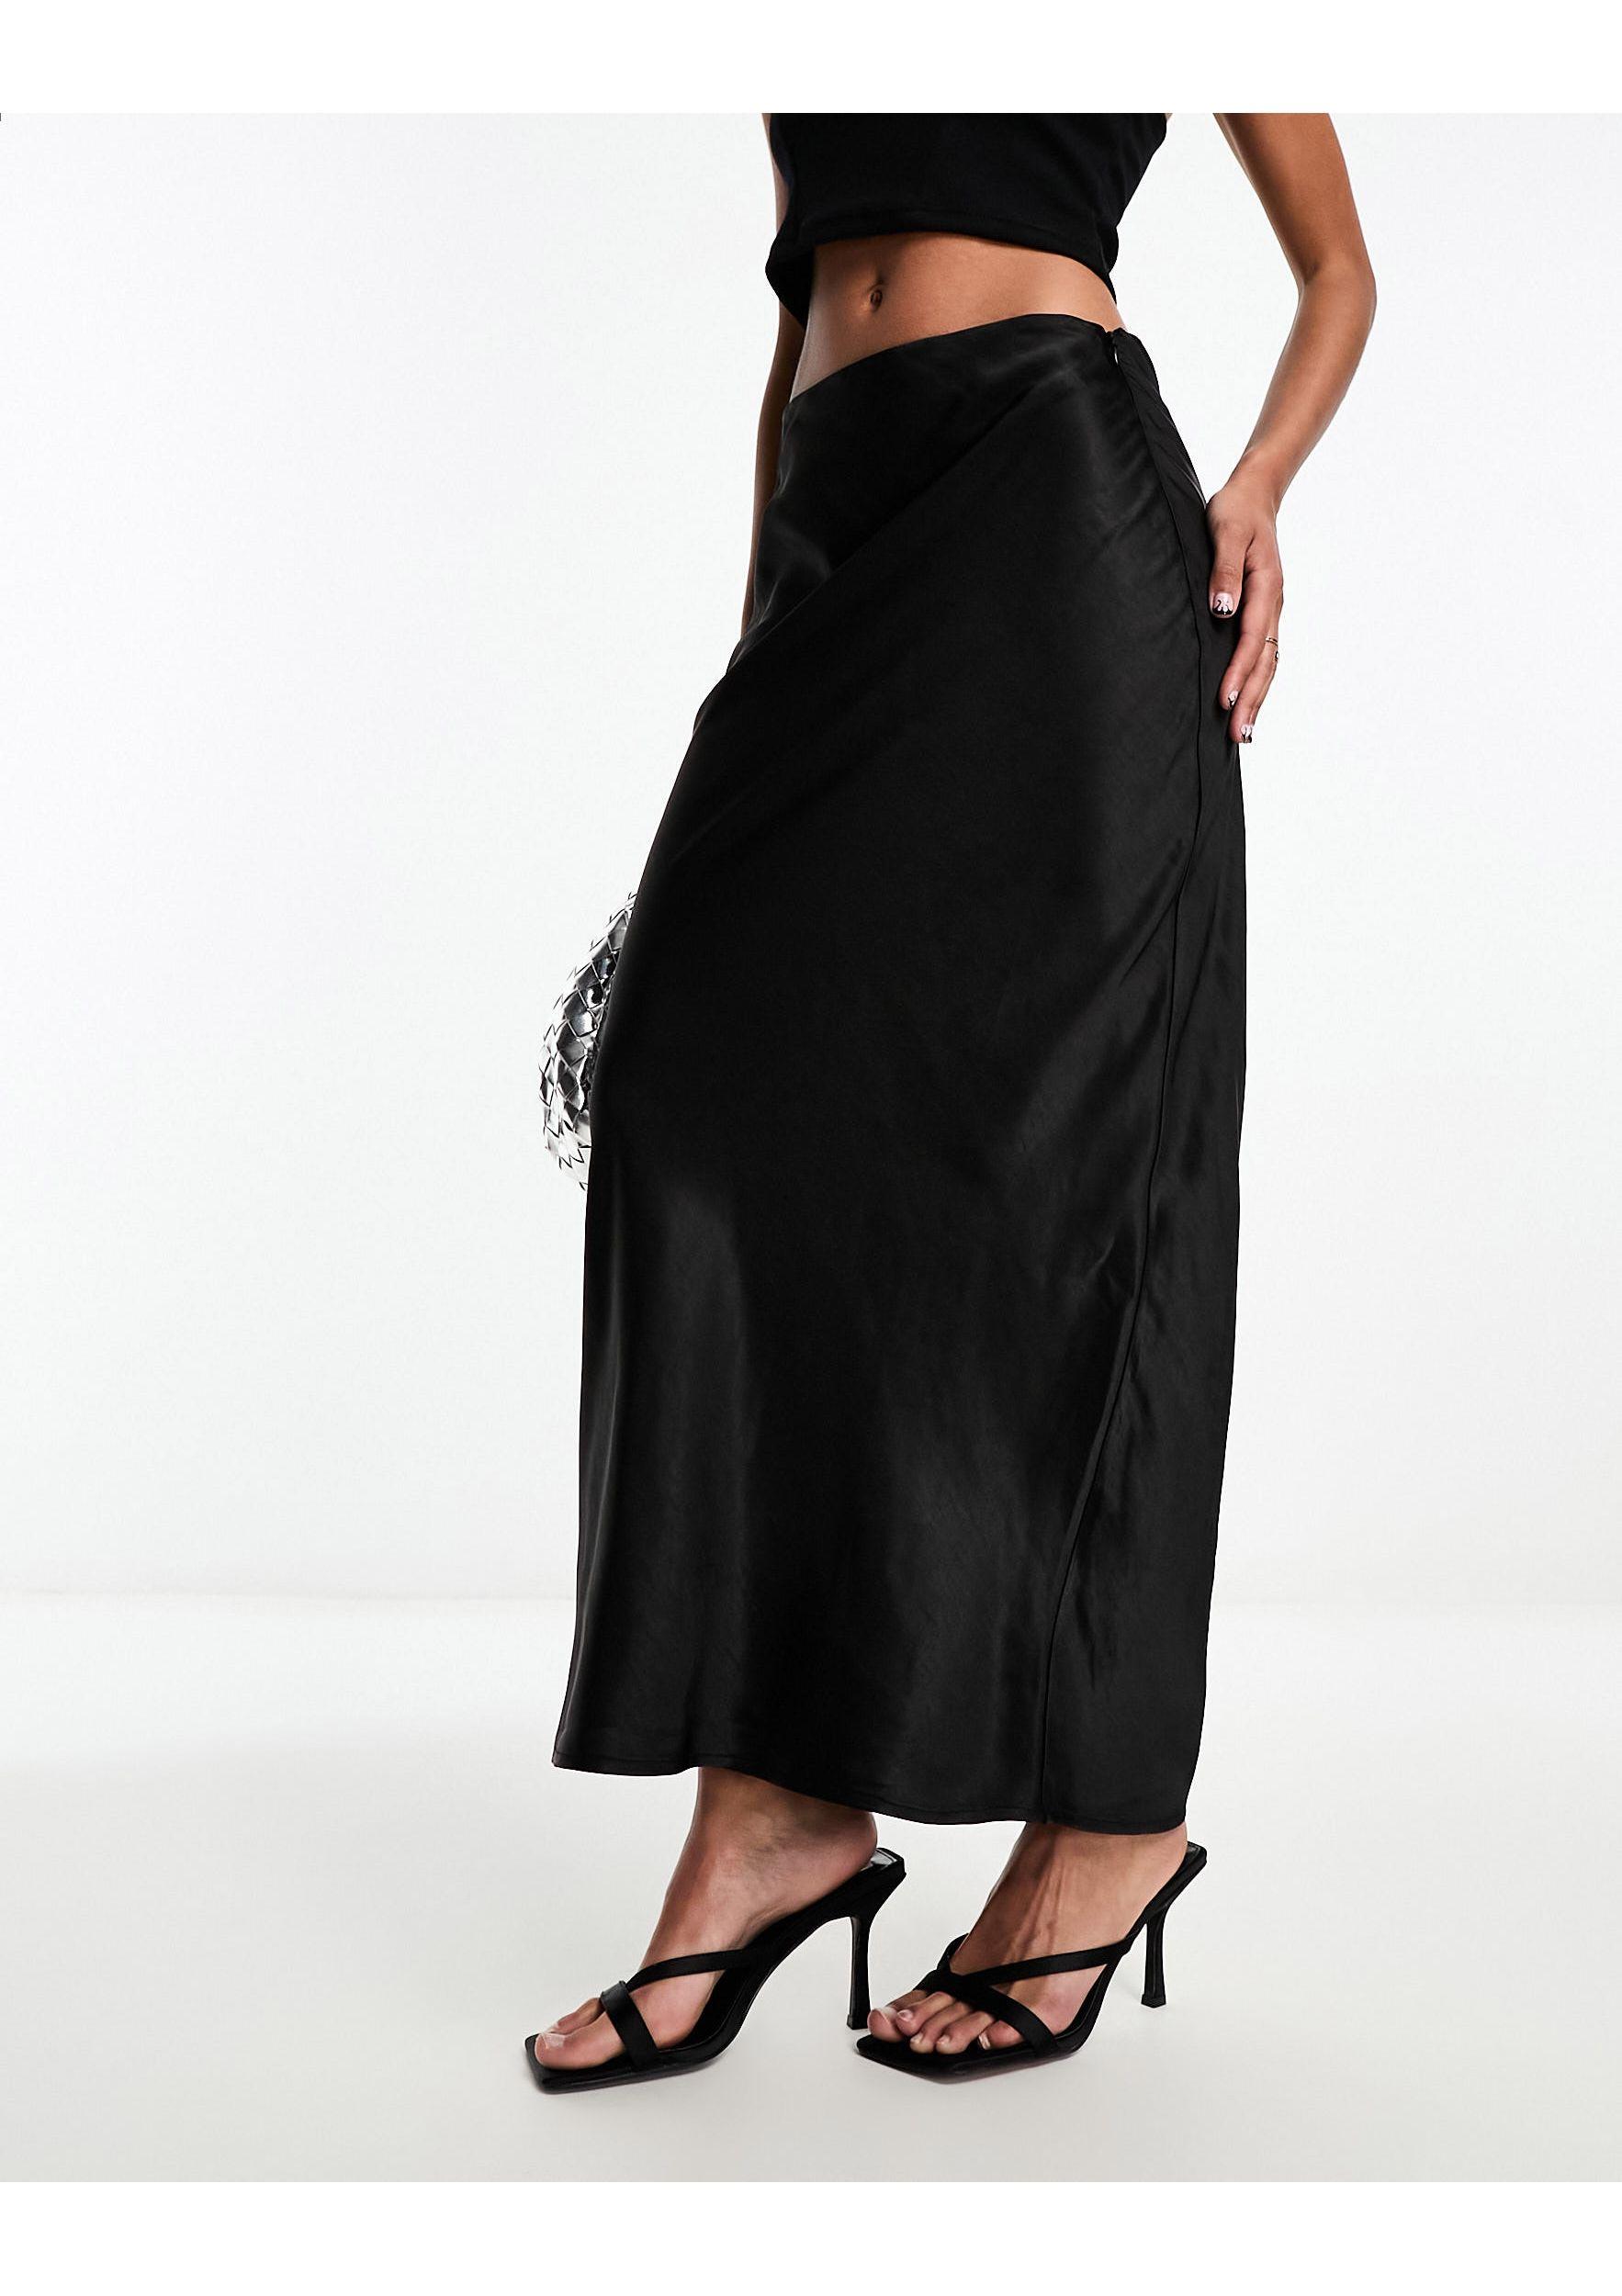 4th & Reckless Satin Maxi Skirt in Black | Lyst